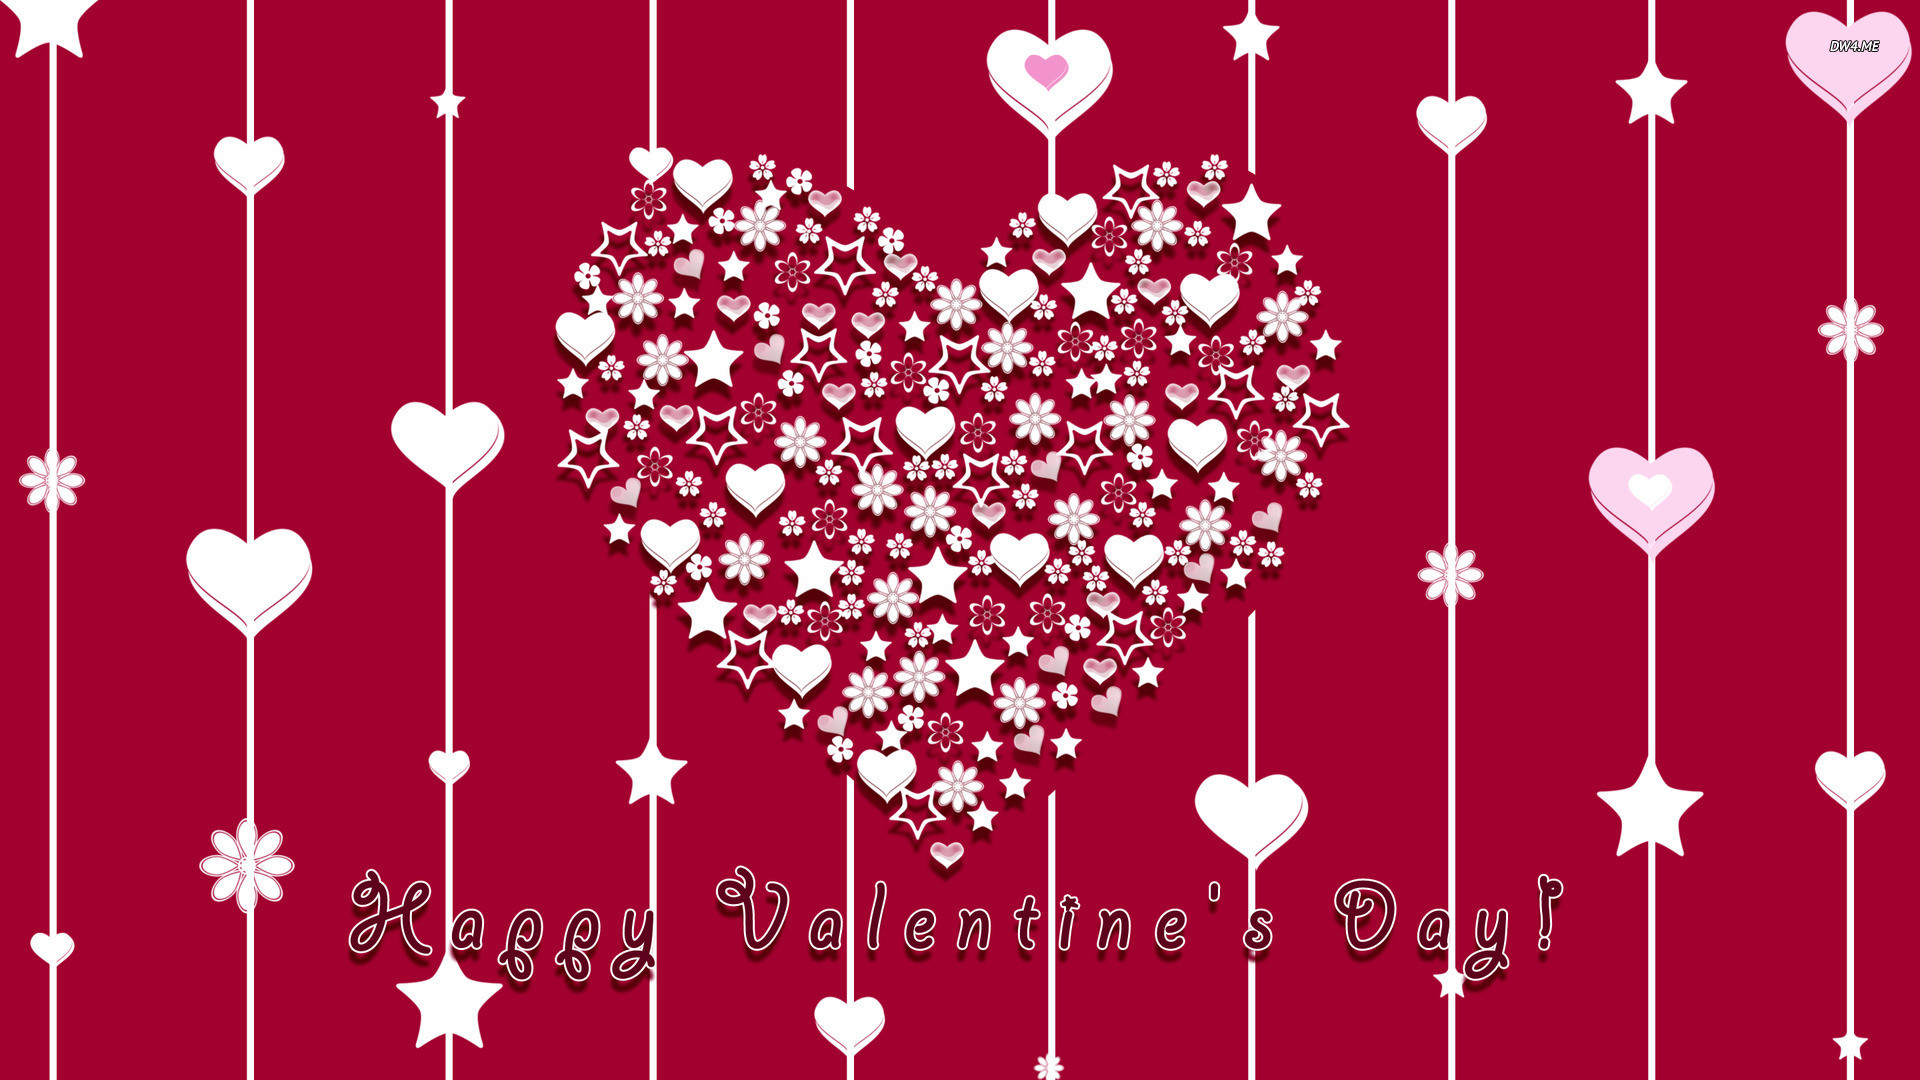 1920x1080 Happy Valentines Day HD Wallpapers - Wallpaper, High Definition, High .